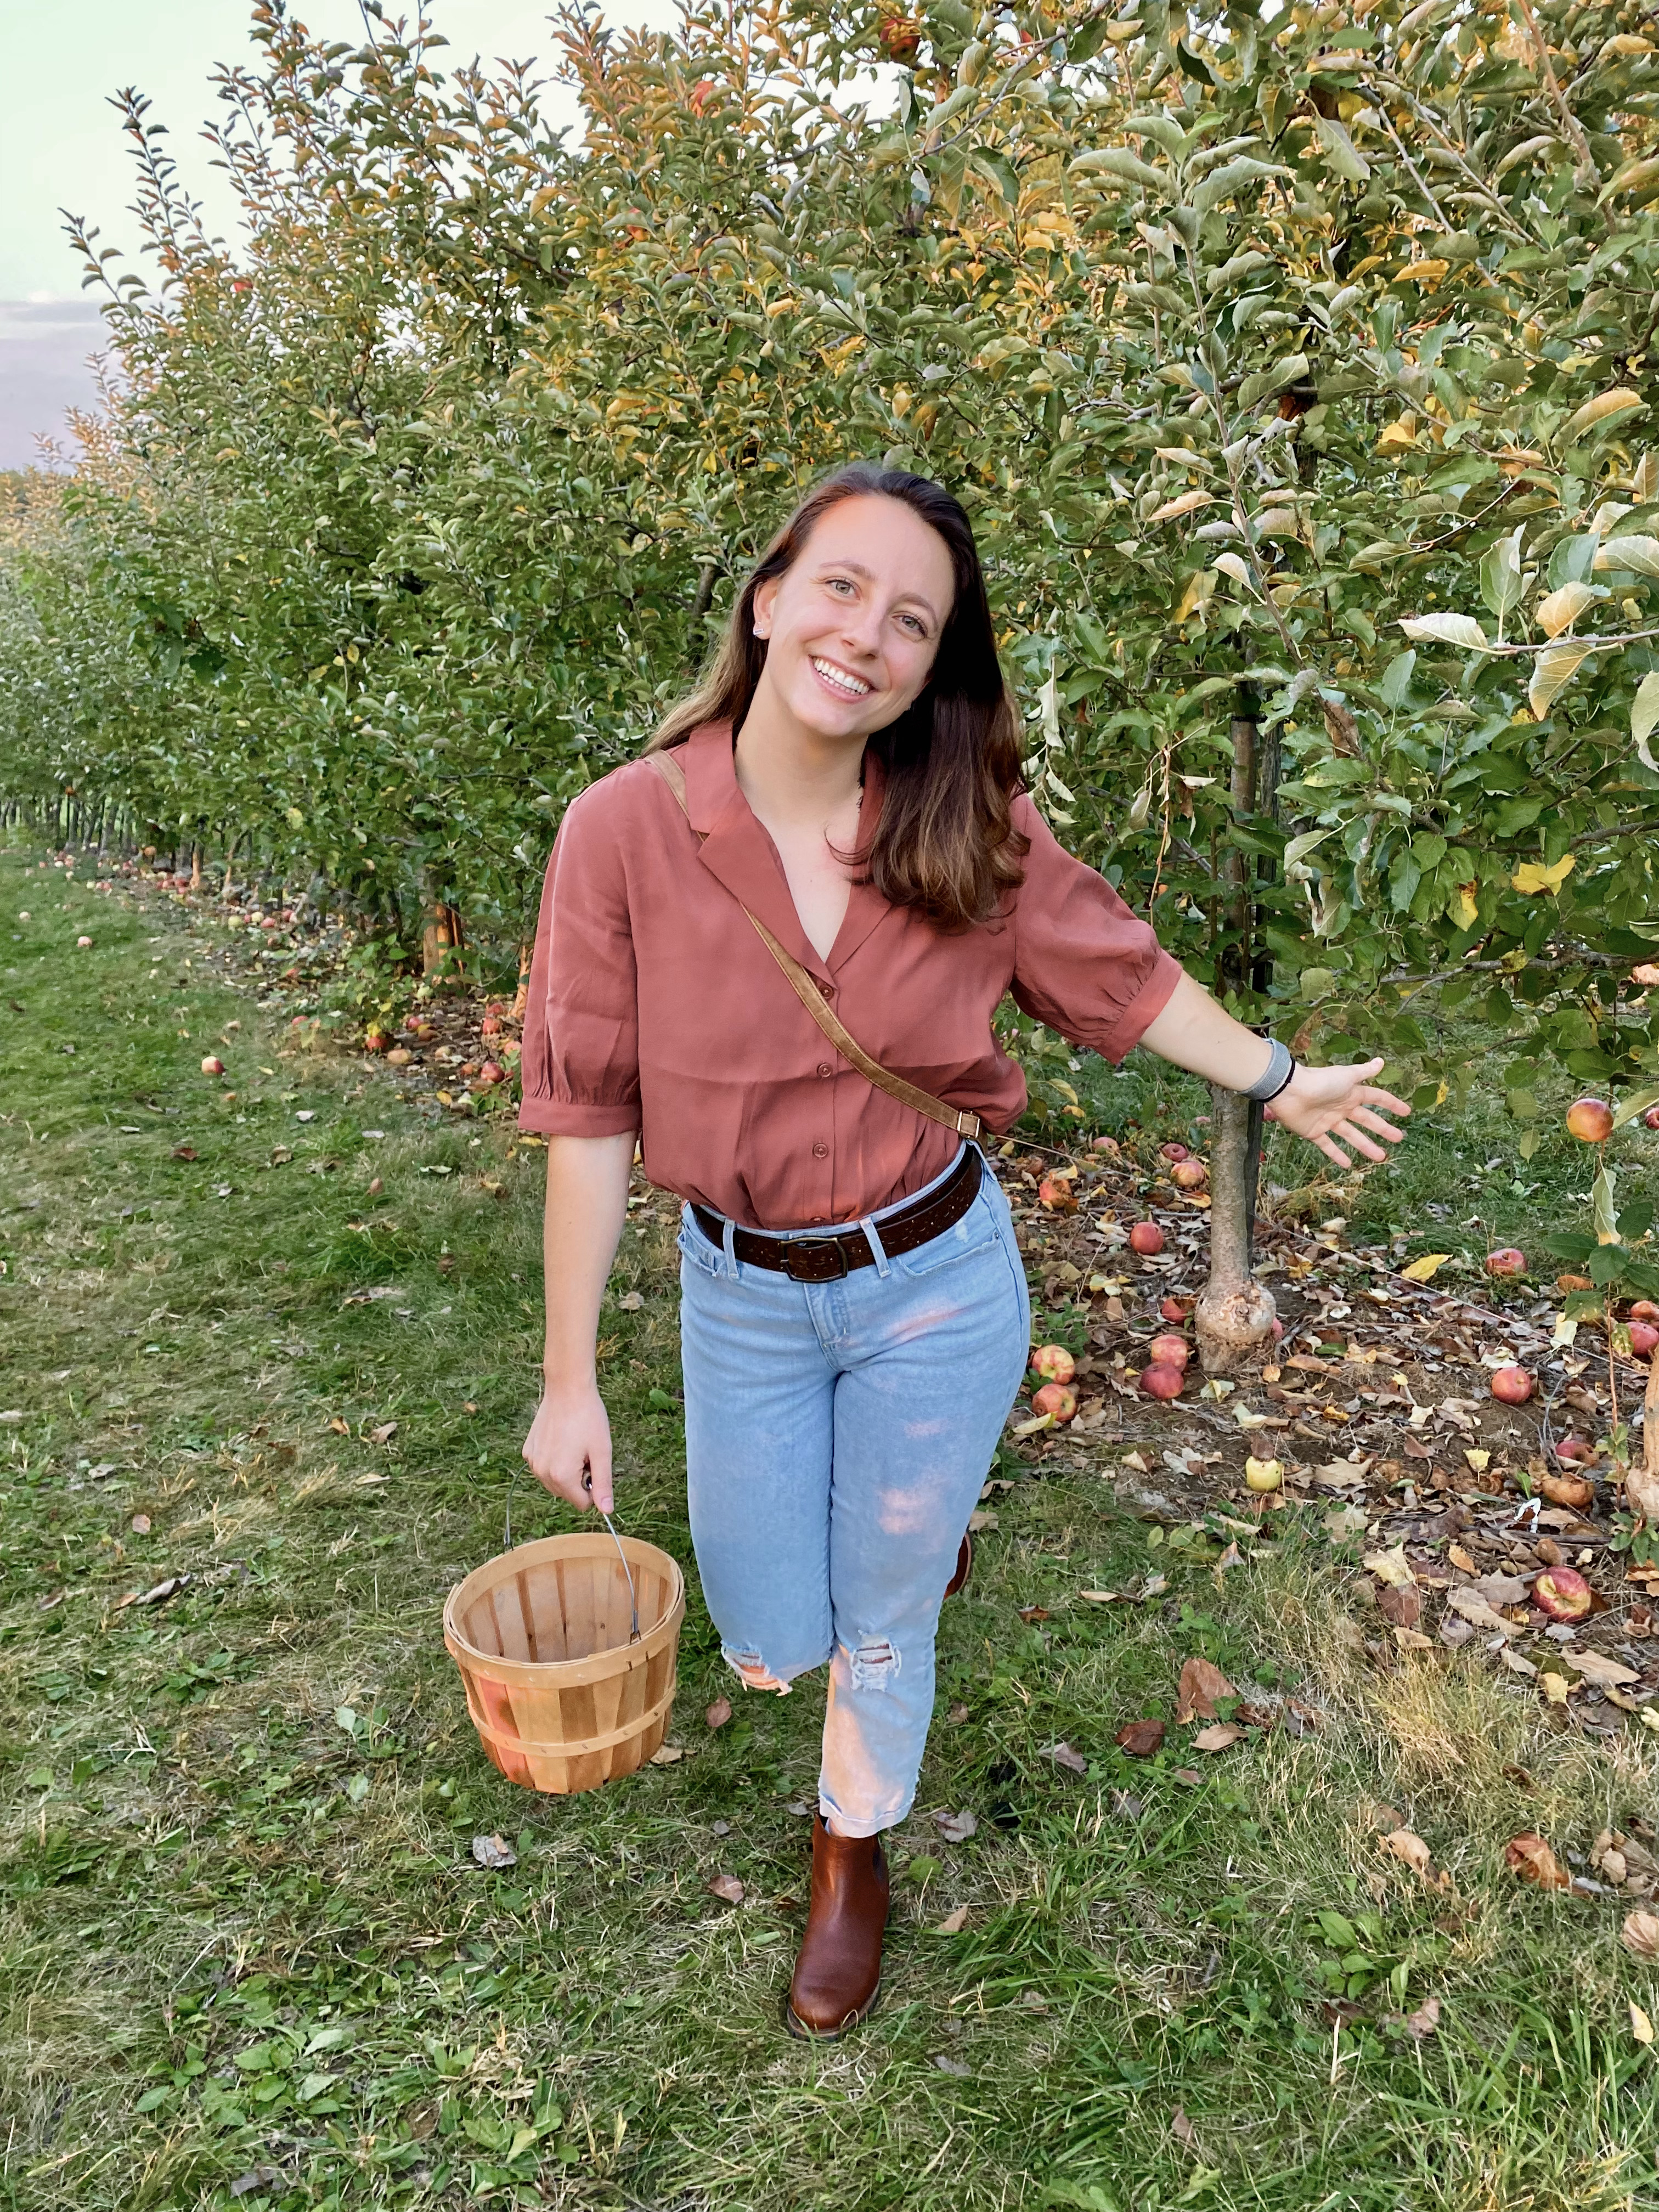 Alex Lewis smiles in an apple orchard, holding a straw bucket.